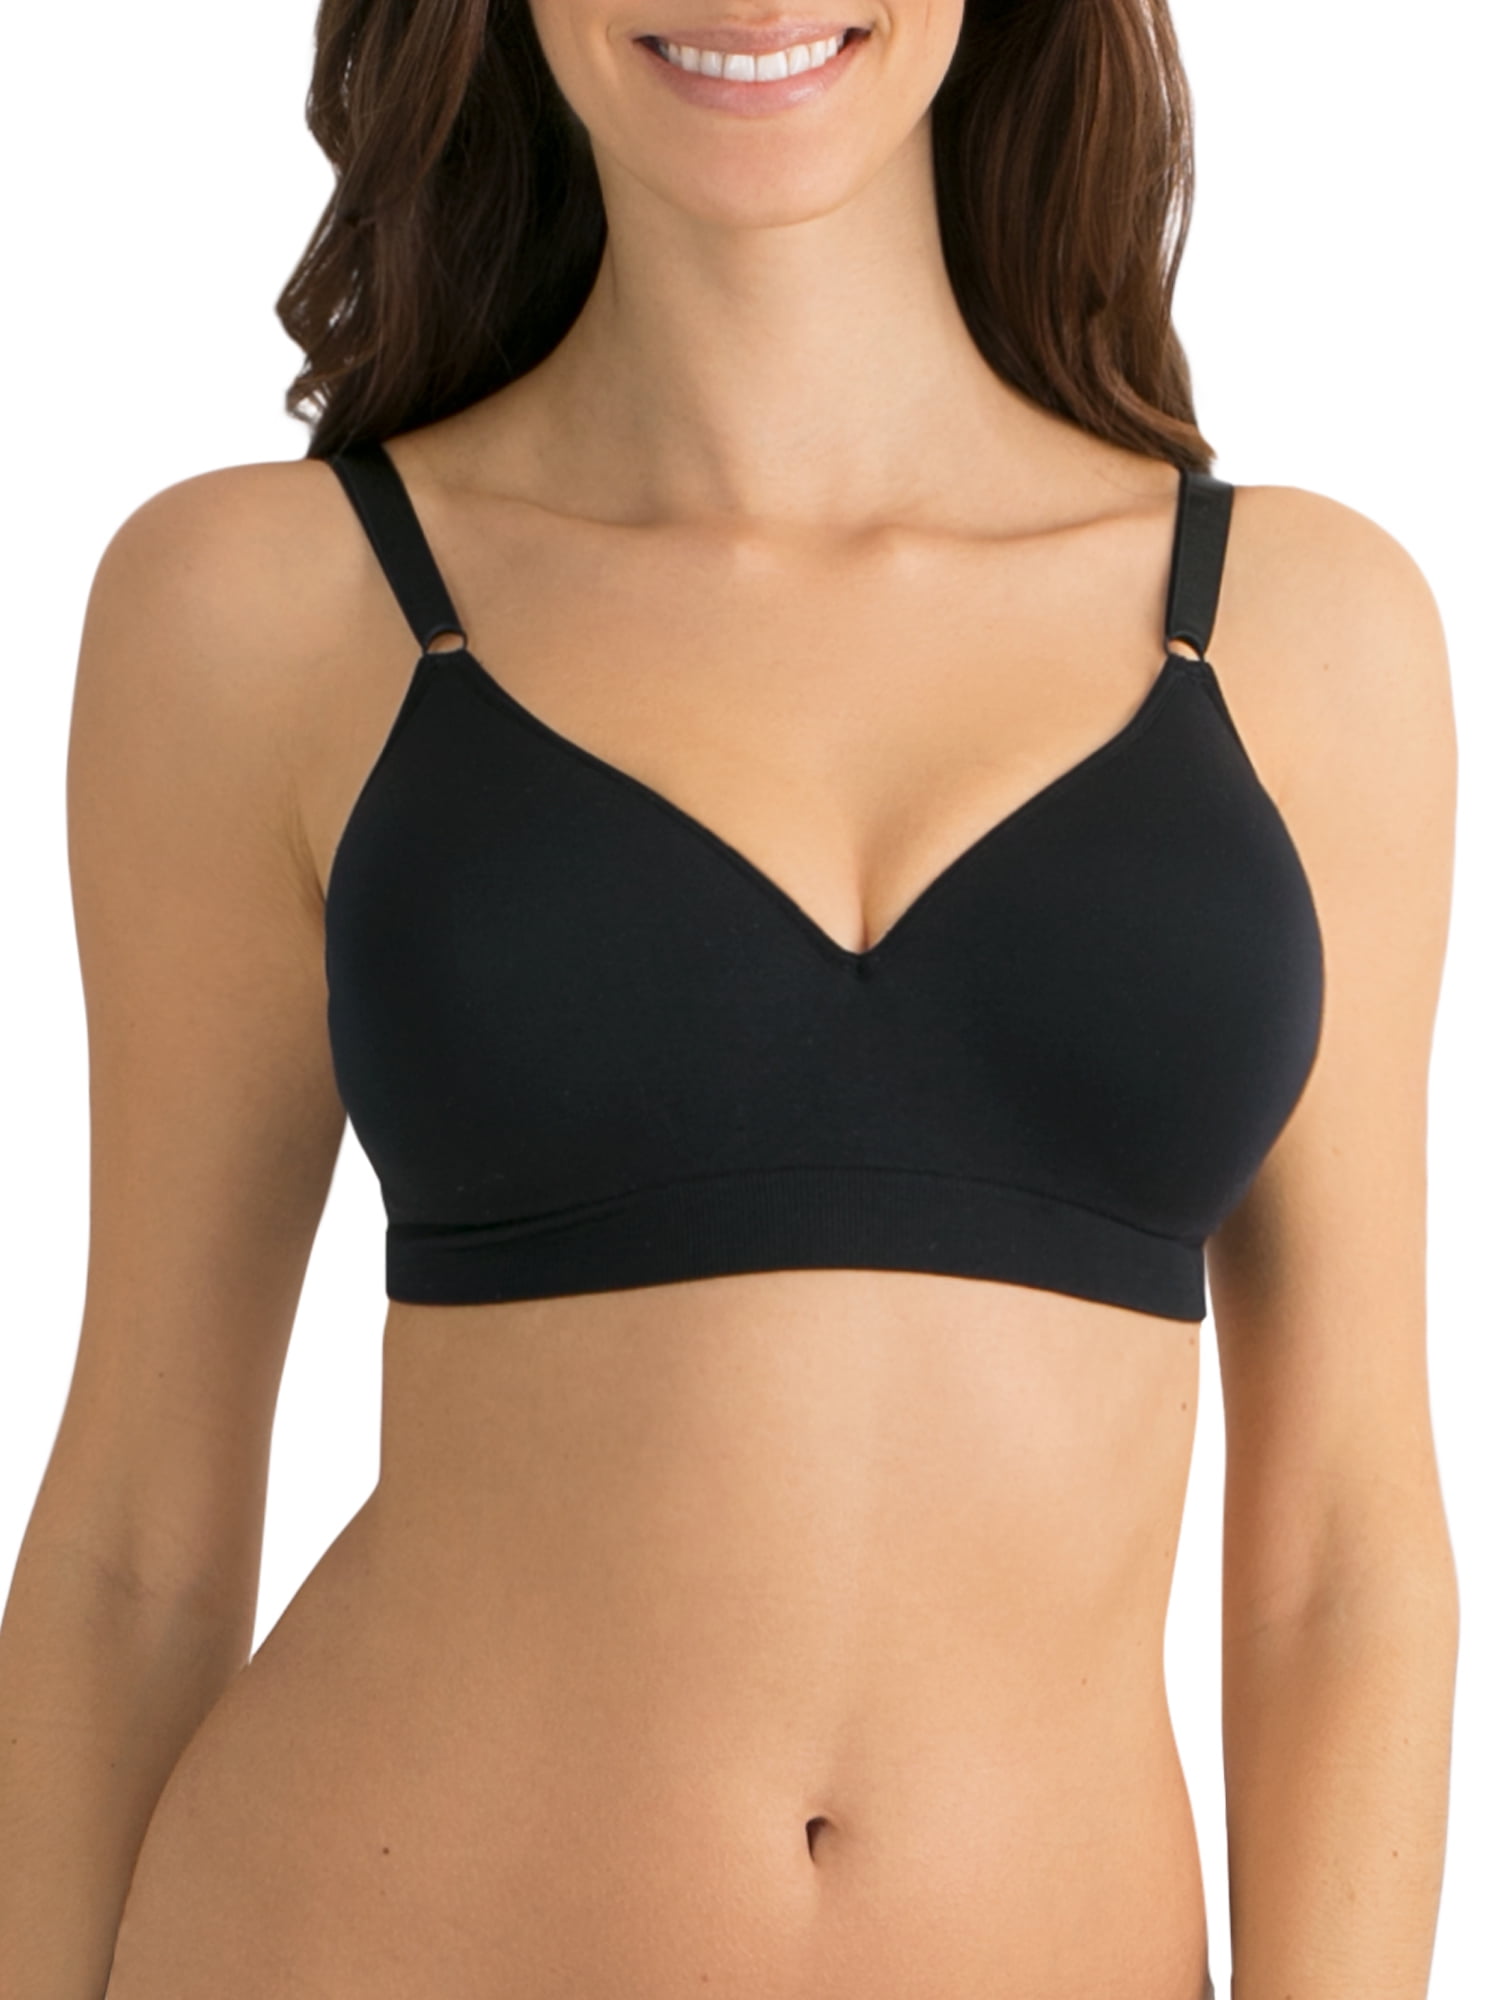 Fruit of the Loom Women's Seamless Pullover Bra W/ Built-in Cups 